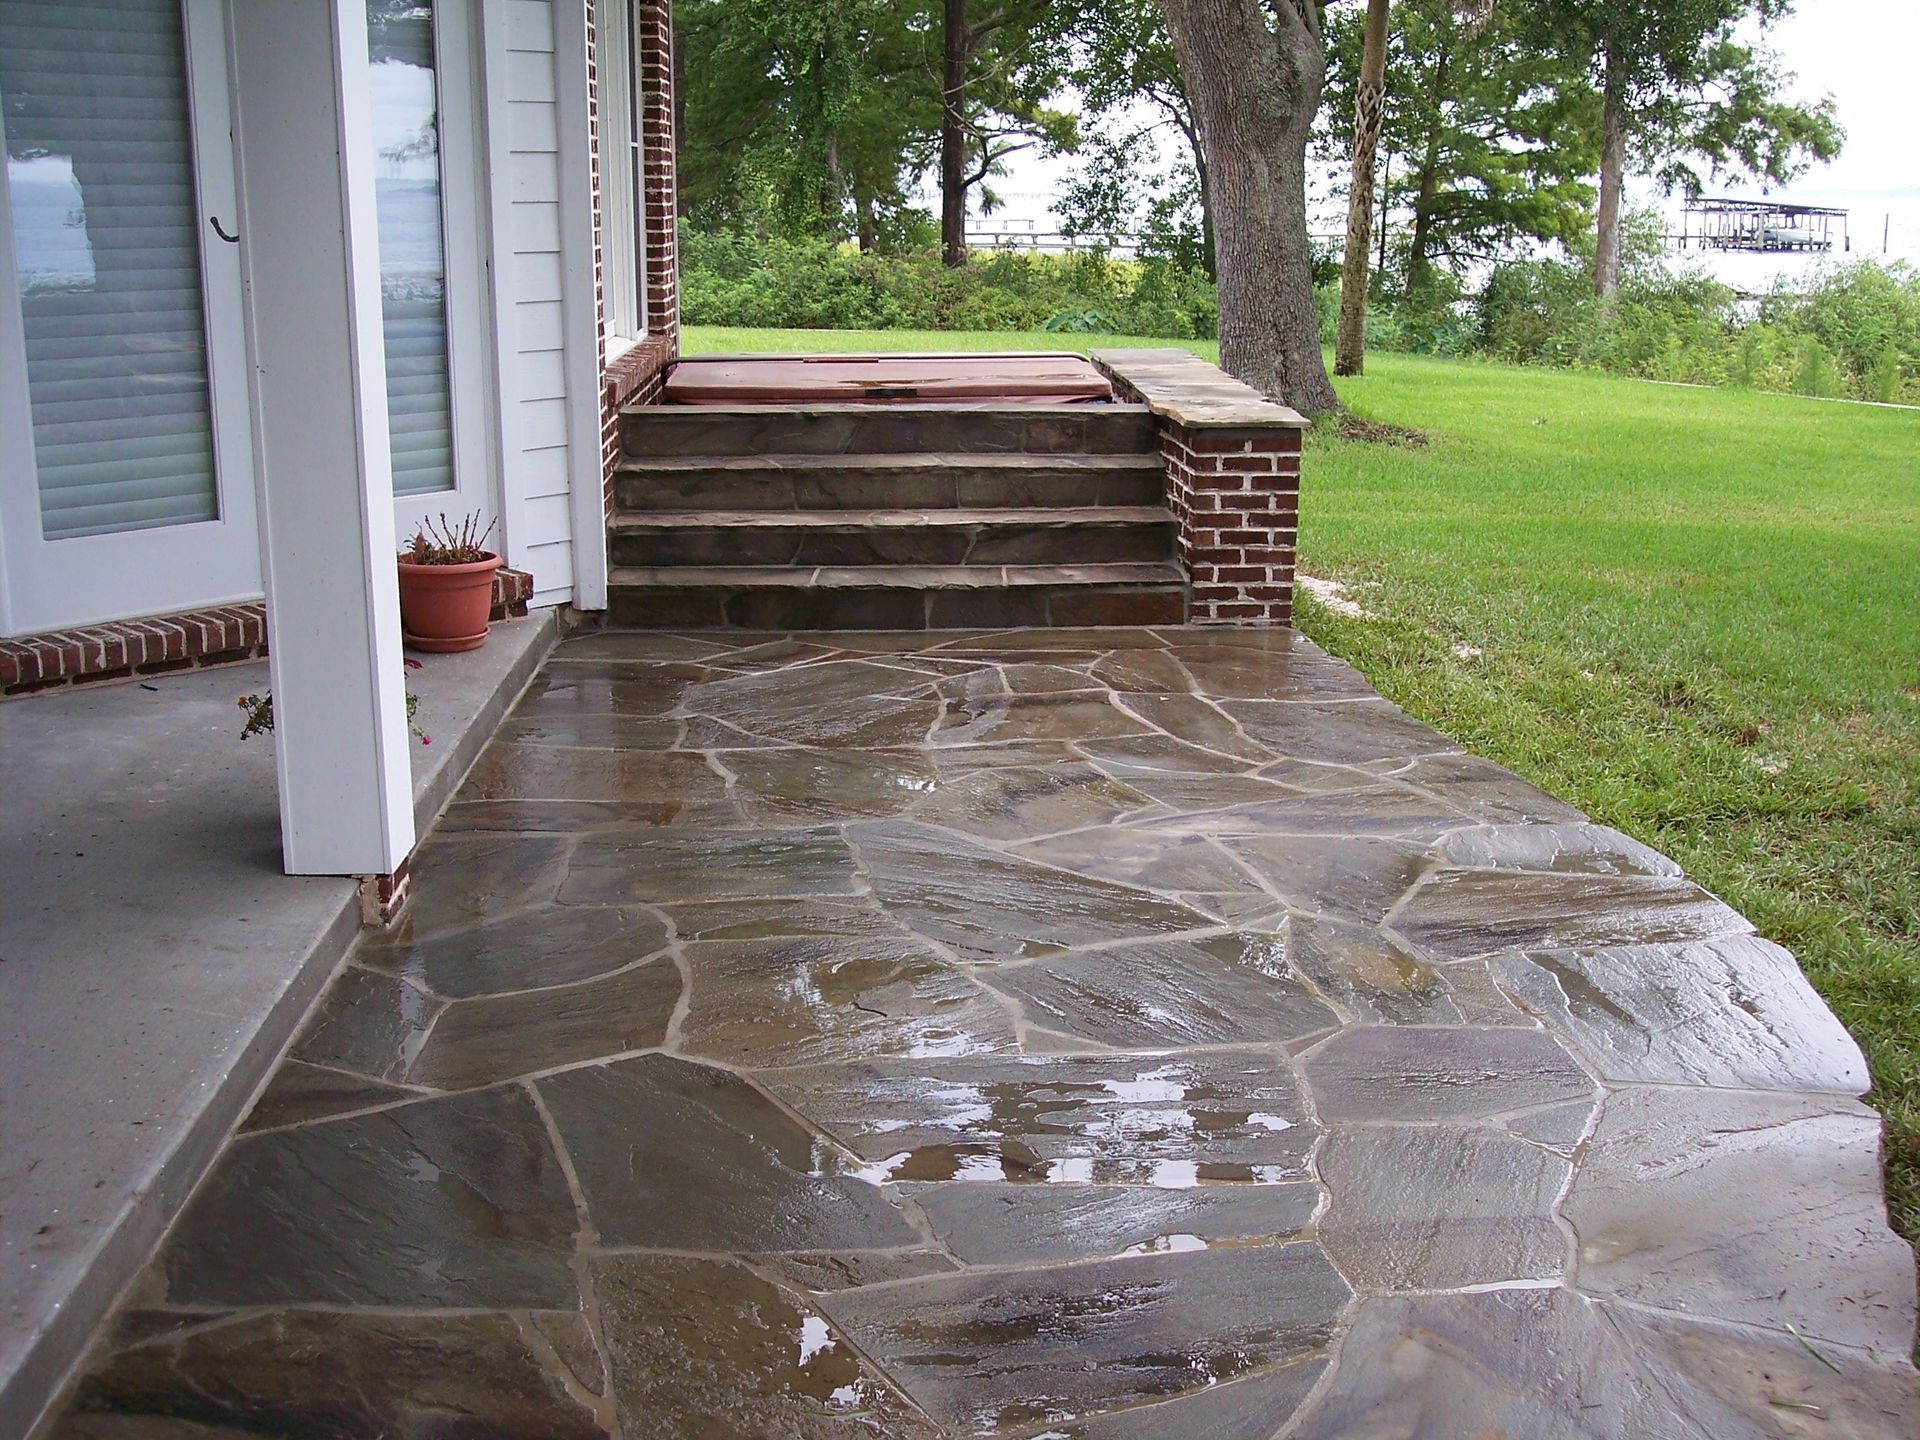 flagstone patio, flagstone steps, stone wall, stone retaining wall, stone baluster, hardscape, paver, stone pavers, stone, decorative stone, patio, paver patio, stone paver patio, walkway, paver walkway, stone walkway, walkway stones, stone paver walkway, garden stones, walkway stones, garden walkway, paver landscaping, stone steps, paver steps, pool deck, paver pool deck, paver pool decking, pool coping, natural stone, stone, stacked stone, veneer, stone veneer, flagstone, bluestone, thermal bluestone, spa design, pool deck design, outdoor kitchen, summer kitchen, fire pit, firepit, sitting wall, pergola, hand-made pergola, seating area, outdoor living, outdoor entertaining, paver contractor, paver design, paver install, paver installation, paver expert, paver experts, warranty, labor warranty, expert installation, expert install, licensed and insured, licensed, insured, licensed insured, award winning designs, Angie's List Super Service Award, Angie's List Award, customer reviews, excellent reputation, reputation, fireplace, fireplace renovation, stone fireplace, fireplace veneer, fireplace reconstruction, before and after pictures, years experience, experienced, Jacksonville, Ponte Vedra, Nocatee, Fleming Island, Queens Harbor, St. Johns, Fruit Cove, St. Augustine, Jacksonville pavers, paver driveway Jacksonville, Jacksonville paver driveway, Jacksonville driveway, paver patio Jacksonville, patio Jacksonville, Jacksonville paver patio, Jacksonville patio, Ponte Vedra pavers, paver driveway Ponte Vedra, driveway Ponte Vedra, Ponte Vedra paver driveway, Ponte Vedra driveway, paver patio Ponte Vedra, patio Ponte Vedra, Ponte Vedra paver patio, Ponte Vedra patio, Nocatee pavers, driveway Nocatee, paver driveway Nocatee, Nocatee driveway, Nocatee paver driveway, paver patio Nocatee, patio Nocatee, Nocatee paver patio, Nocatee patio, Sawgrass pavers, Sawgrass paver driveway, Sawgrass driveway, driveway Sawgrass, paver driveway Sawgrass, paver patio Sawgrass, patio Sawgrass, Sawgrass patio, Sawgrass paver patio, Fleming Island pavers, Fleming Island paver driveway, paver driveway Fleming Island, Fleming Island driveway, driveway Fleming Island, paver patio Fleming Island, Fleming Island paver patio, patio Fleming Island, Fleming Island patio, Queens Harbor pavers, paver driveway Queens Harbor, Queens Harbor paver driveway, Queens Harbor driveway, driveway Queens Harbor, paver patio Queens Harbor, Queens Harbor paver patio, patio Queens Harbor, Queens Harbor patio, St. Johns pavers, St. Johns paver driveway, paver driveway St. Johns, St. Johns driveway, driveway St. Johns, St. Johns paver patio, paver patio St. Johns, patio St. Johns, St. Johns patio, Fruit Cove pavers, paver driveway Fruit Cove, Fruit Cove paver driveway, driveway Fruit Cove, Fruit Cove driveway, Fruit Cove paver patio, paver patio Fruit Cove, patio Fruit Cove, Fruit Cove patio, St. Augustine pavers, paver driveway St. Augustine, St. Augustine paver driveway, driveway St. Augustine, St. Augustine driveway, St. Augustine patio, patio St Augustine, St. Augustine paver patio, paver patio St. Augustine, Mandarin pavers, Mandarin paver driveway, paver driveway Mandarin, driveway Mandarin, Mandarin driveway, paver patio Mandarin, Mandarin paver patio, patio Mandarin, Mandarin patio